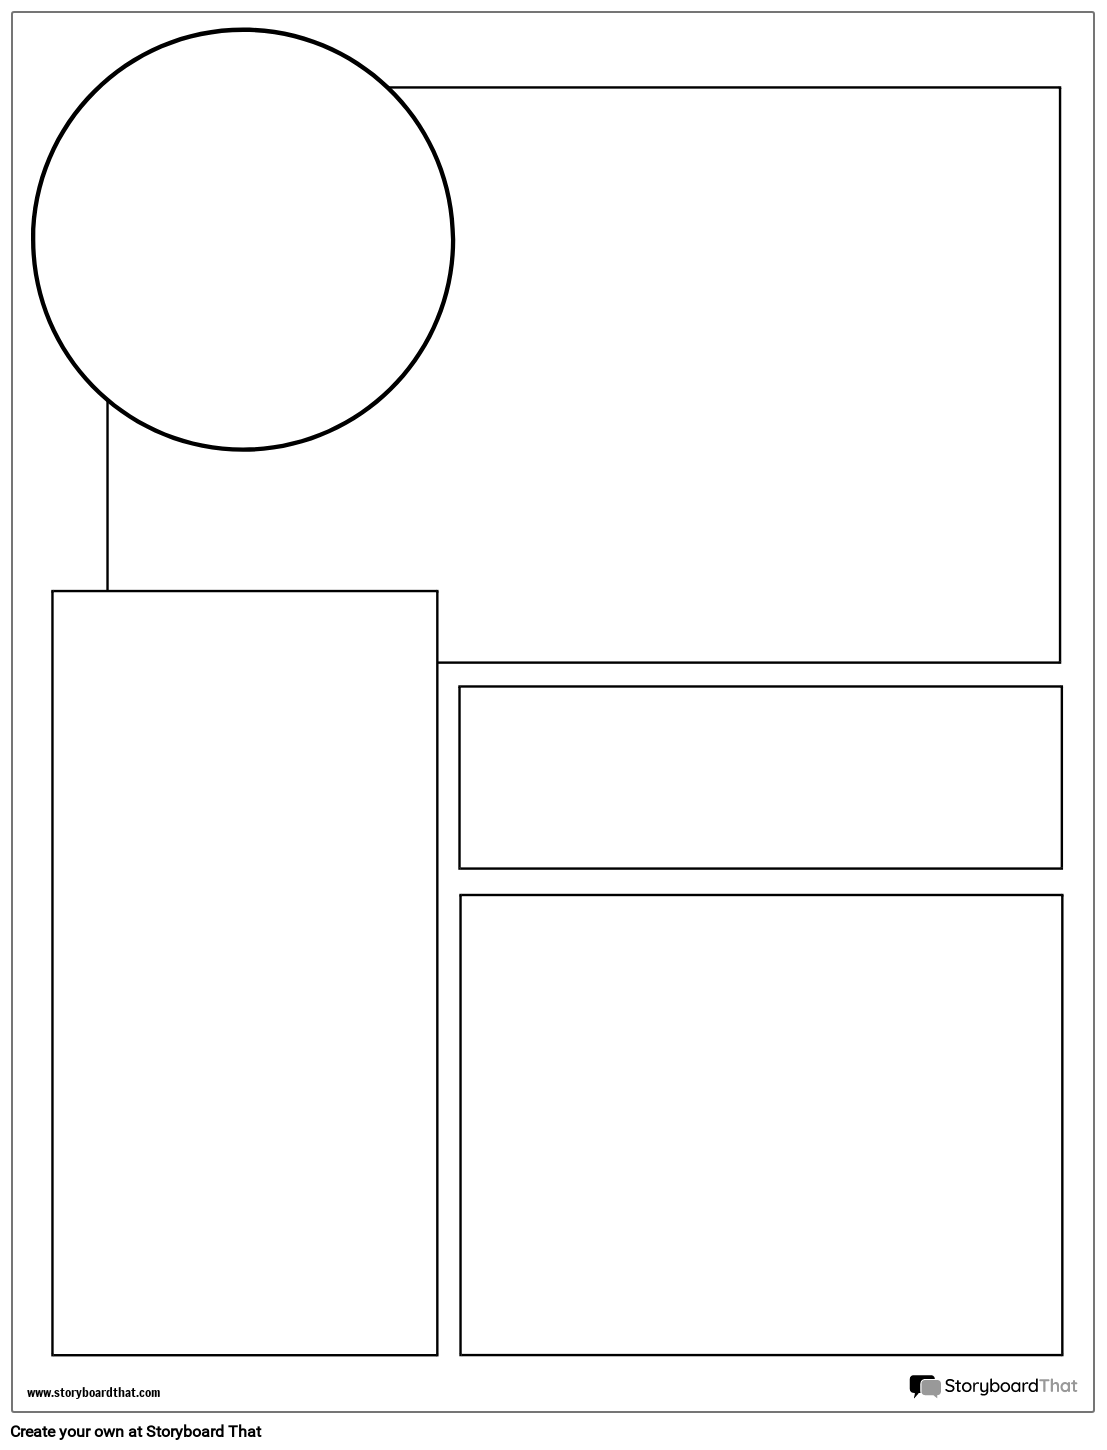 GN Layout 9